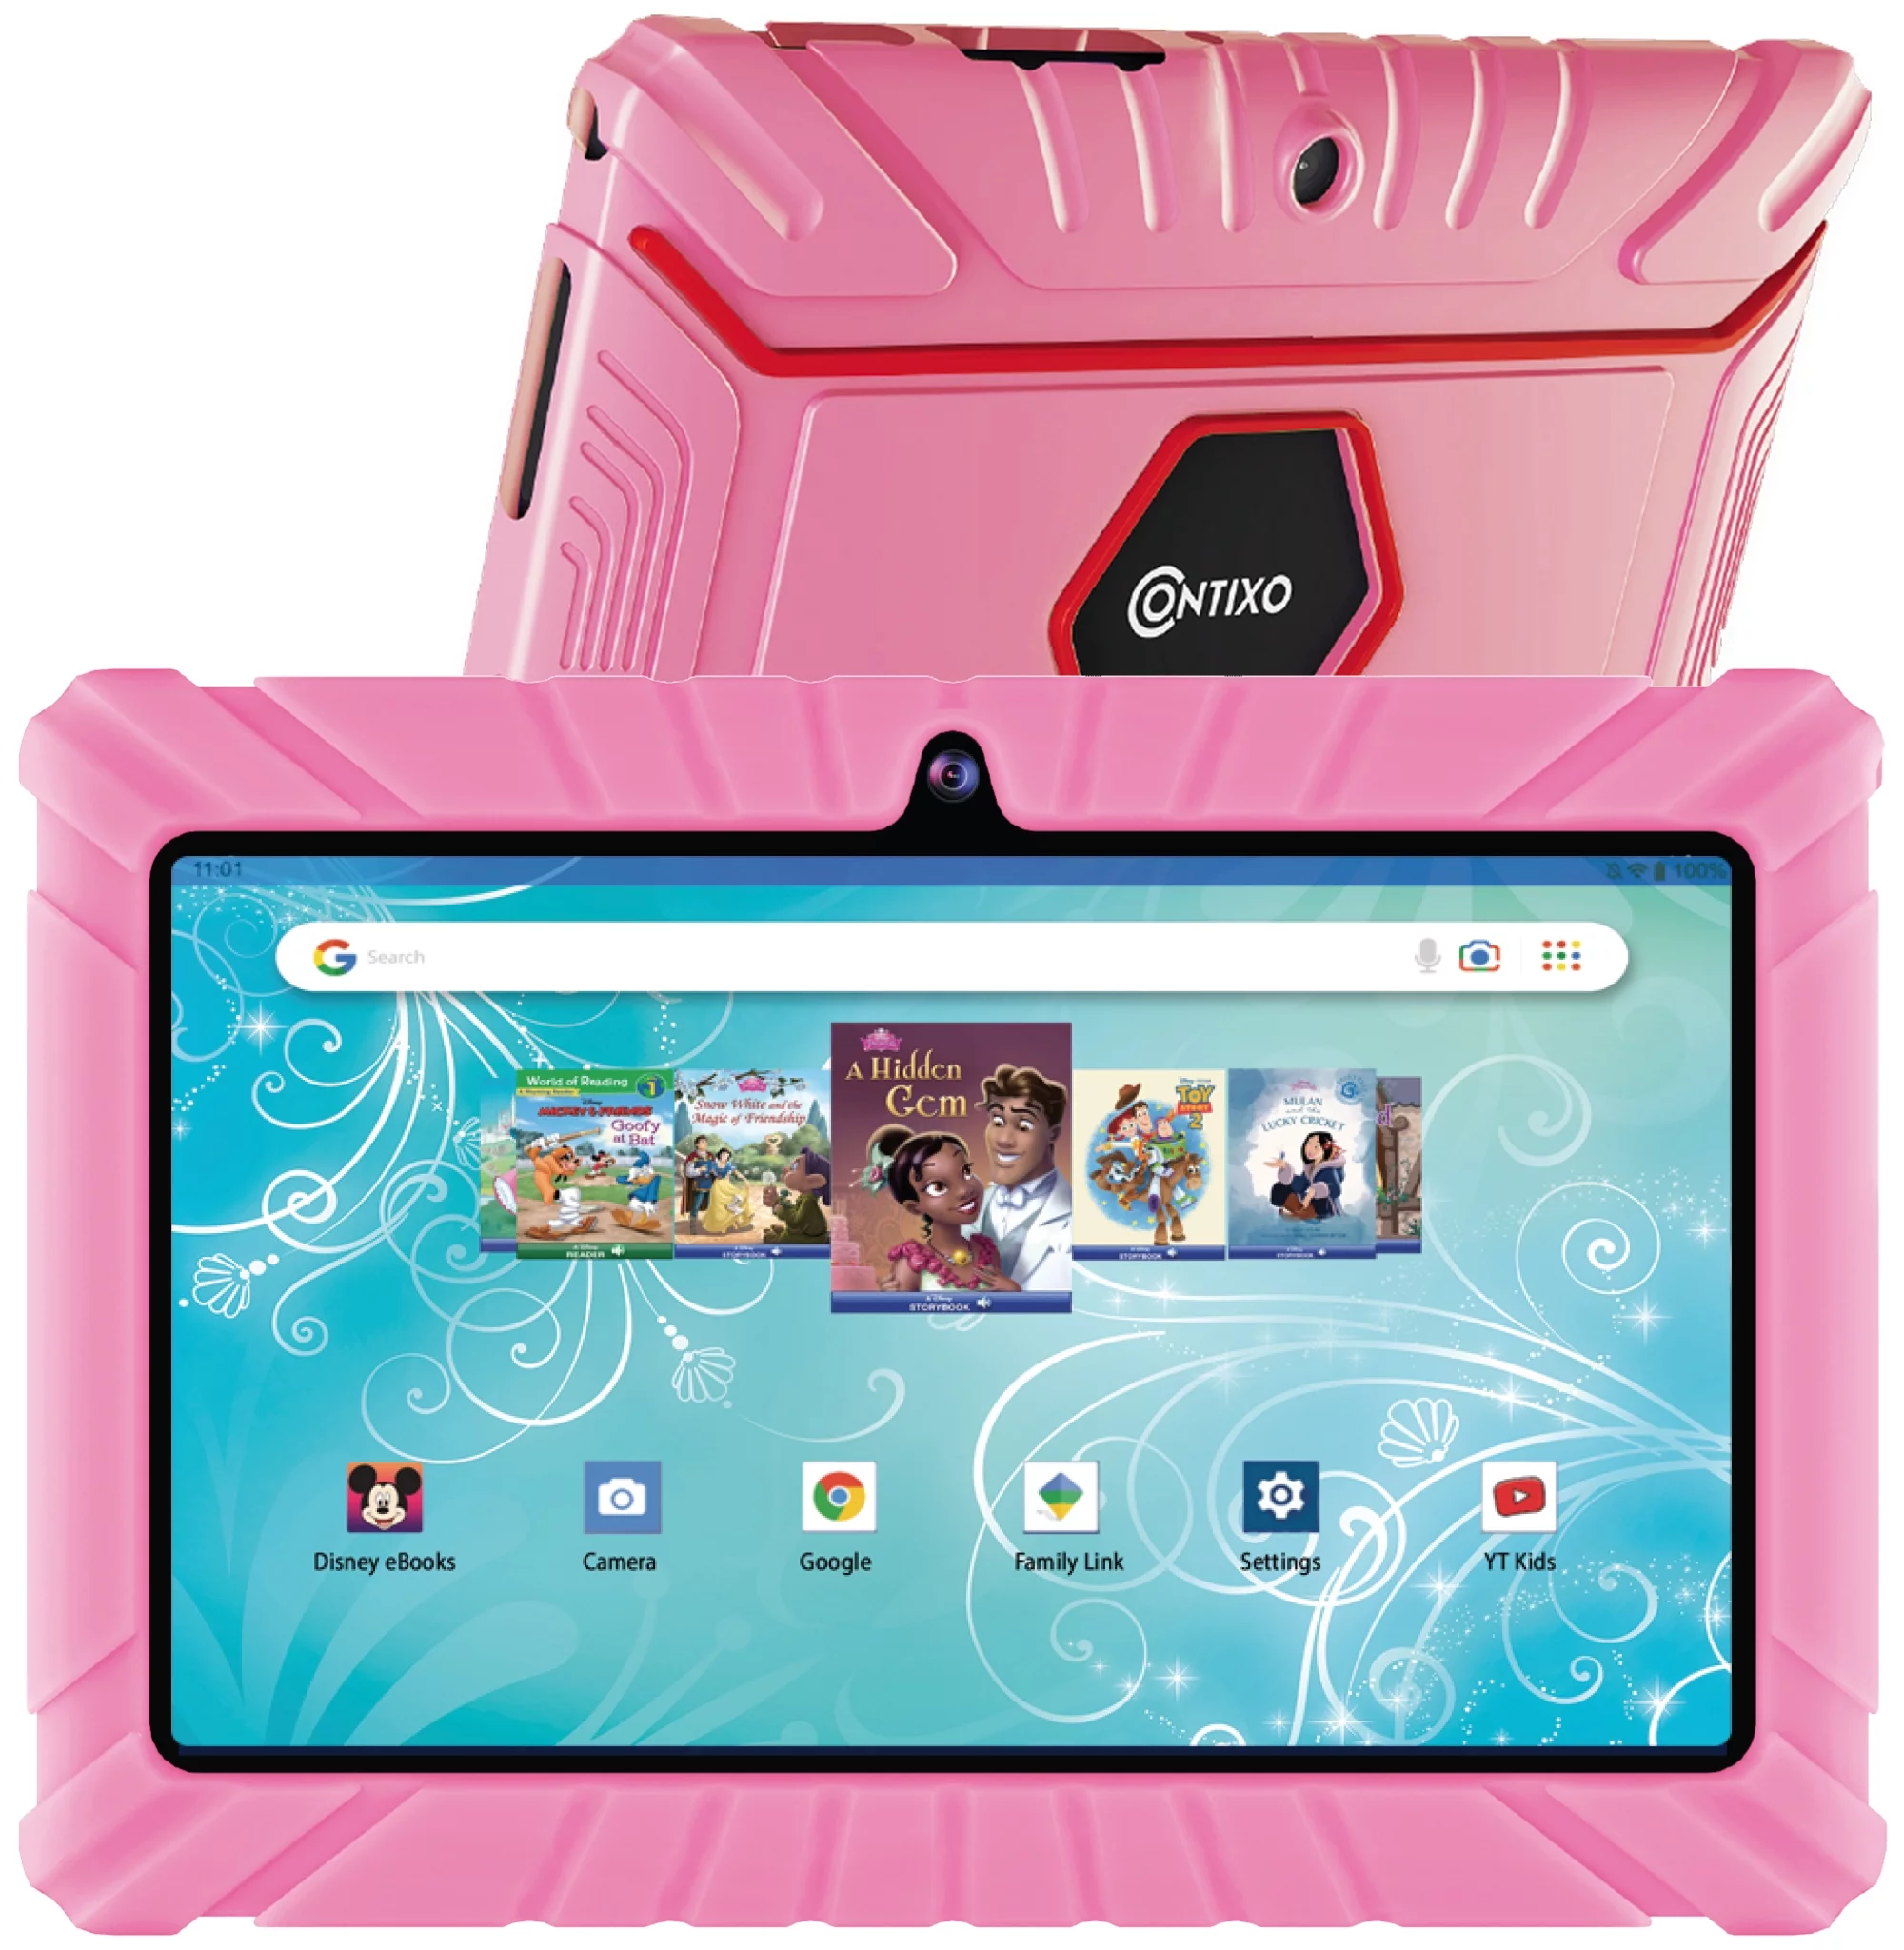 Contixo 7" Kids Tablet 16GB WiFi Android Tablet For Kids Bluetooth Parental Control Pre-Installed Learning Tablet App for Toddlers Children Kid-Proof Protective Case, V8-2